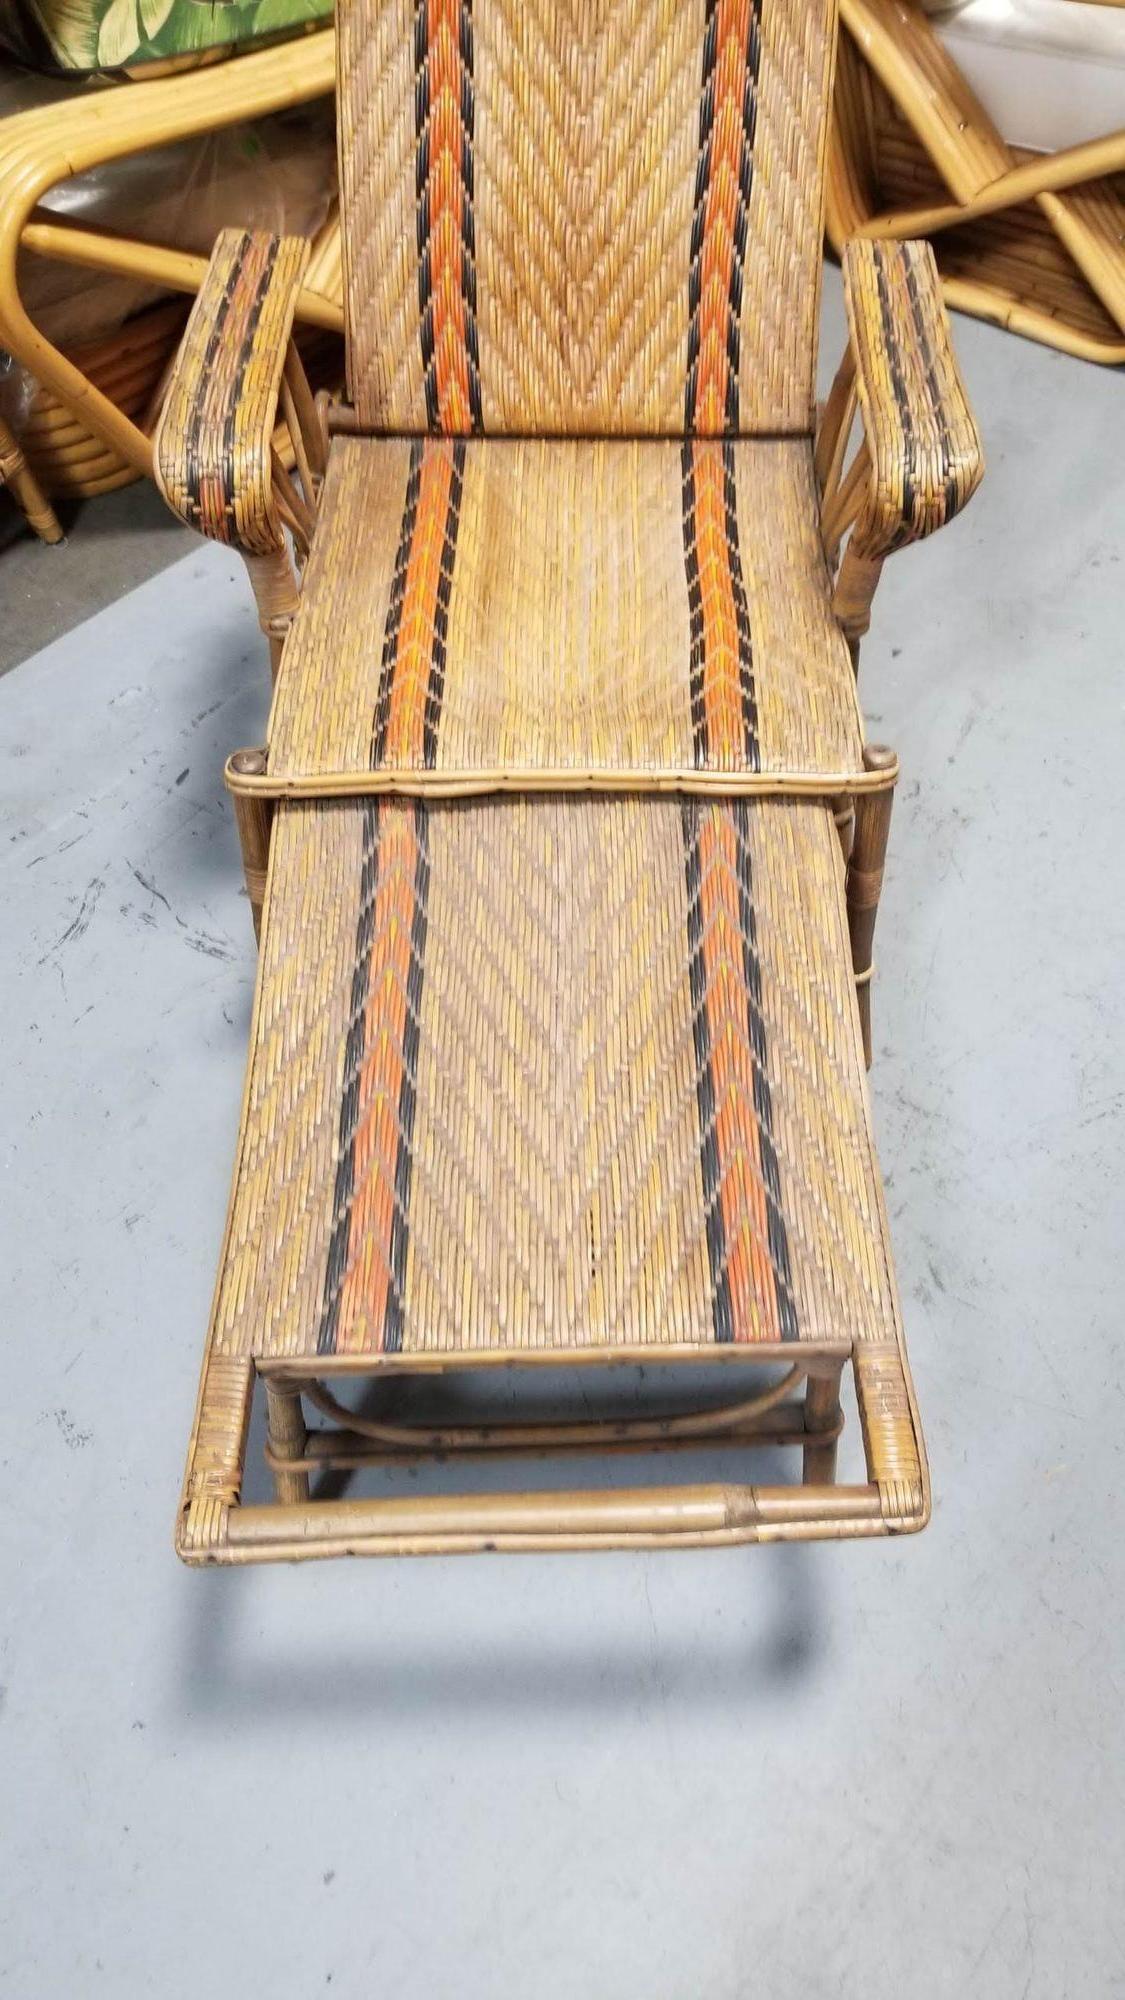 Restored Rattan Wicker French Art Deco Adjustable Chaise Lounge In Excellent Condition For Sale In Van Nuys, CA